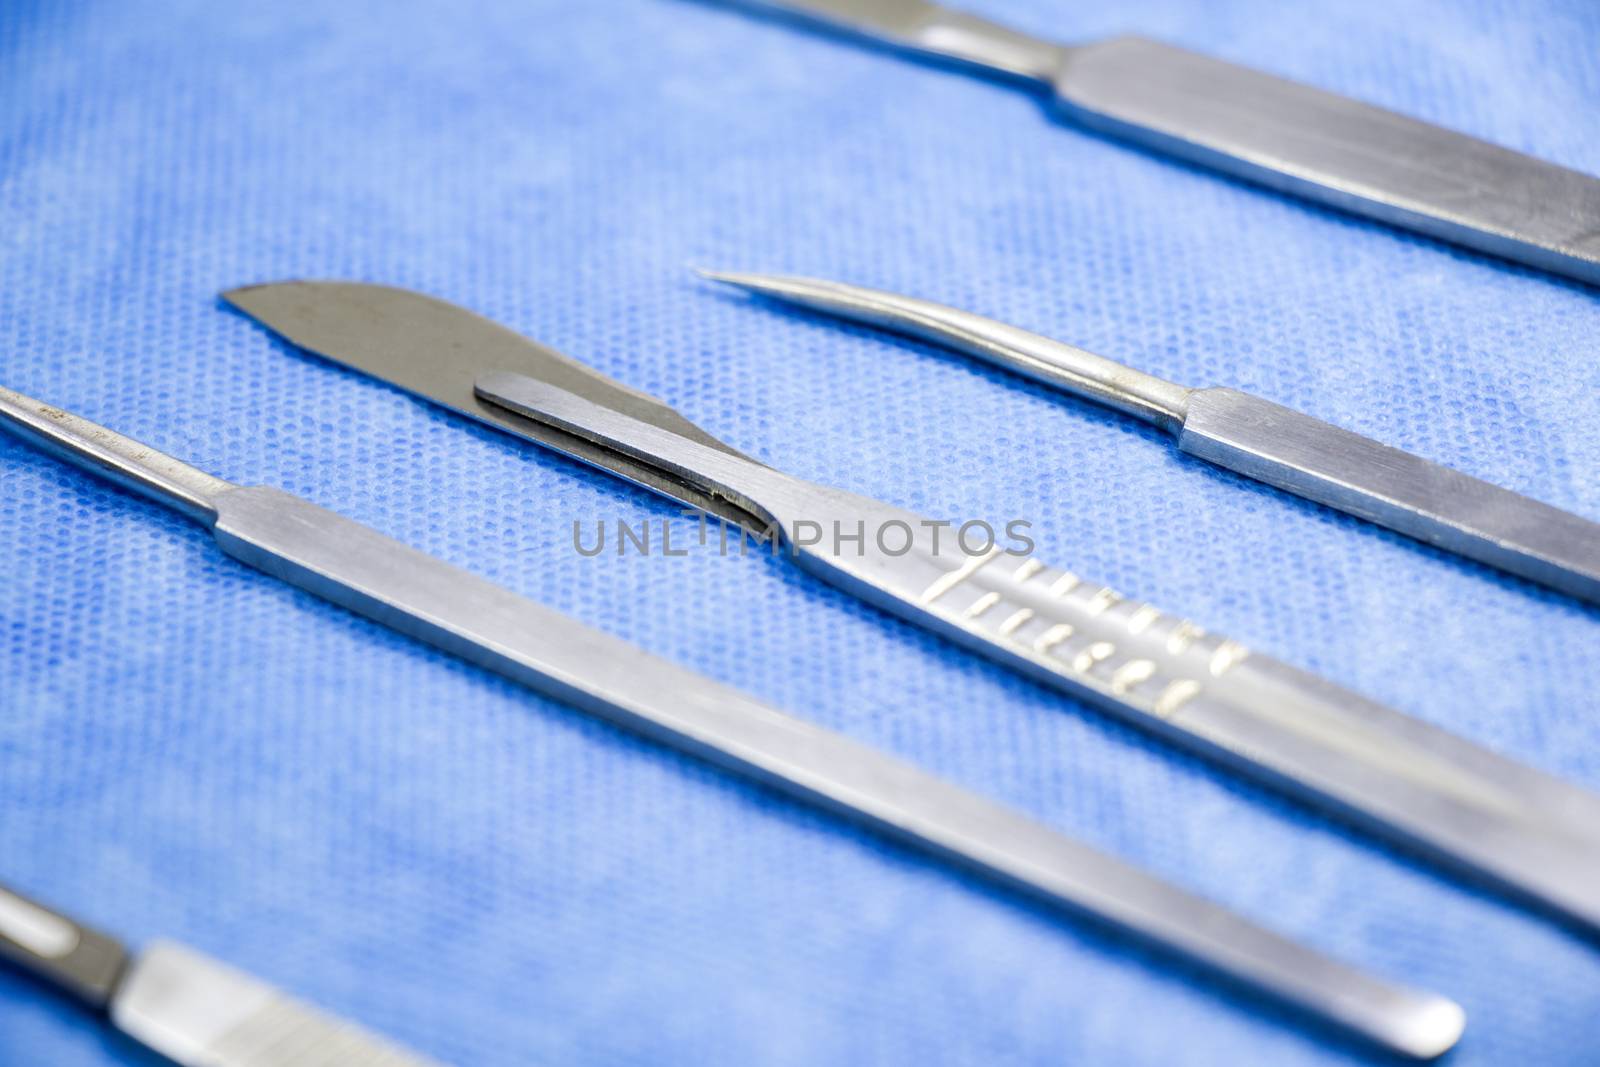 Dissection Kit, Stainless Steel Tools for Medical Students of Anatomy, Biology, Veterinary by Taidundua